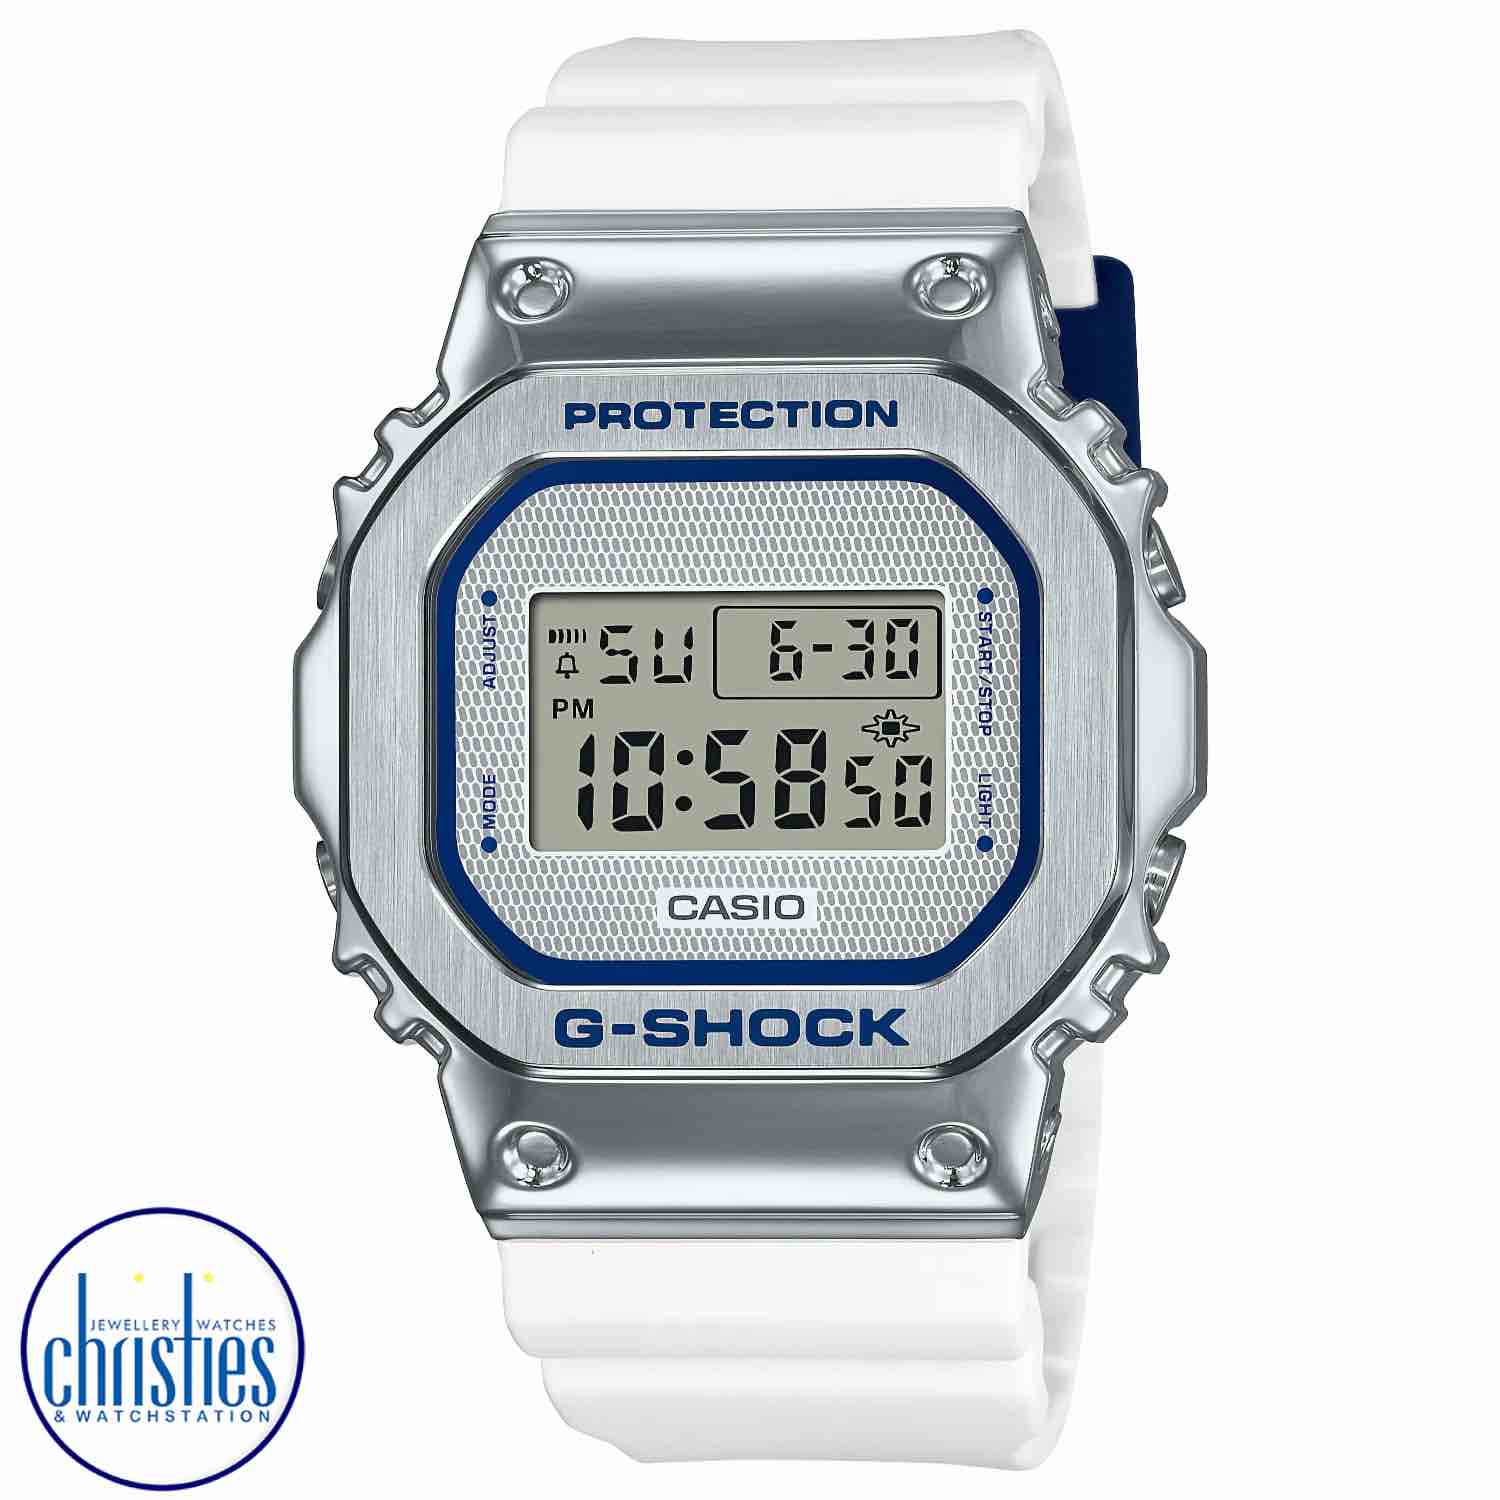 GM5600LC-7D G-Shock Lovers Collection Watch. Take a nostalgic walk through the Casio Lover’s Collection with a pair of retro designs inspired by the first matching G-SHOCK watches ever, back in 1996. g shock watches price